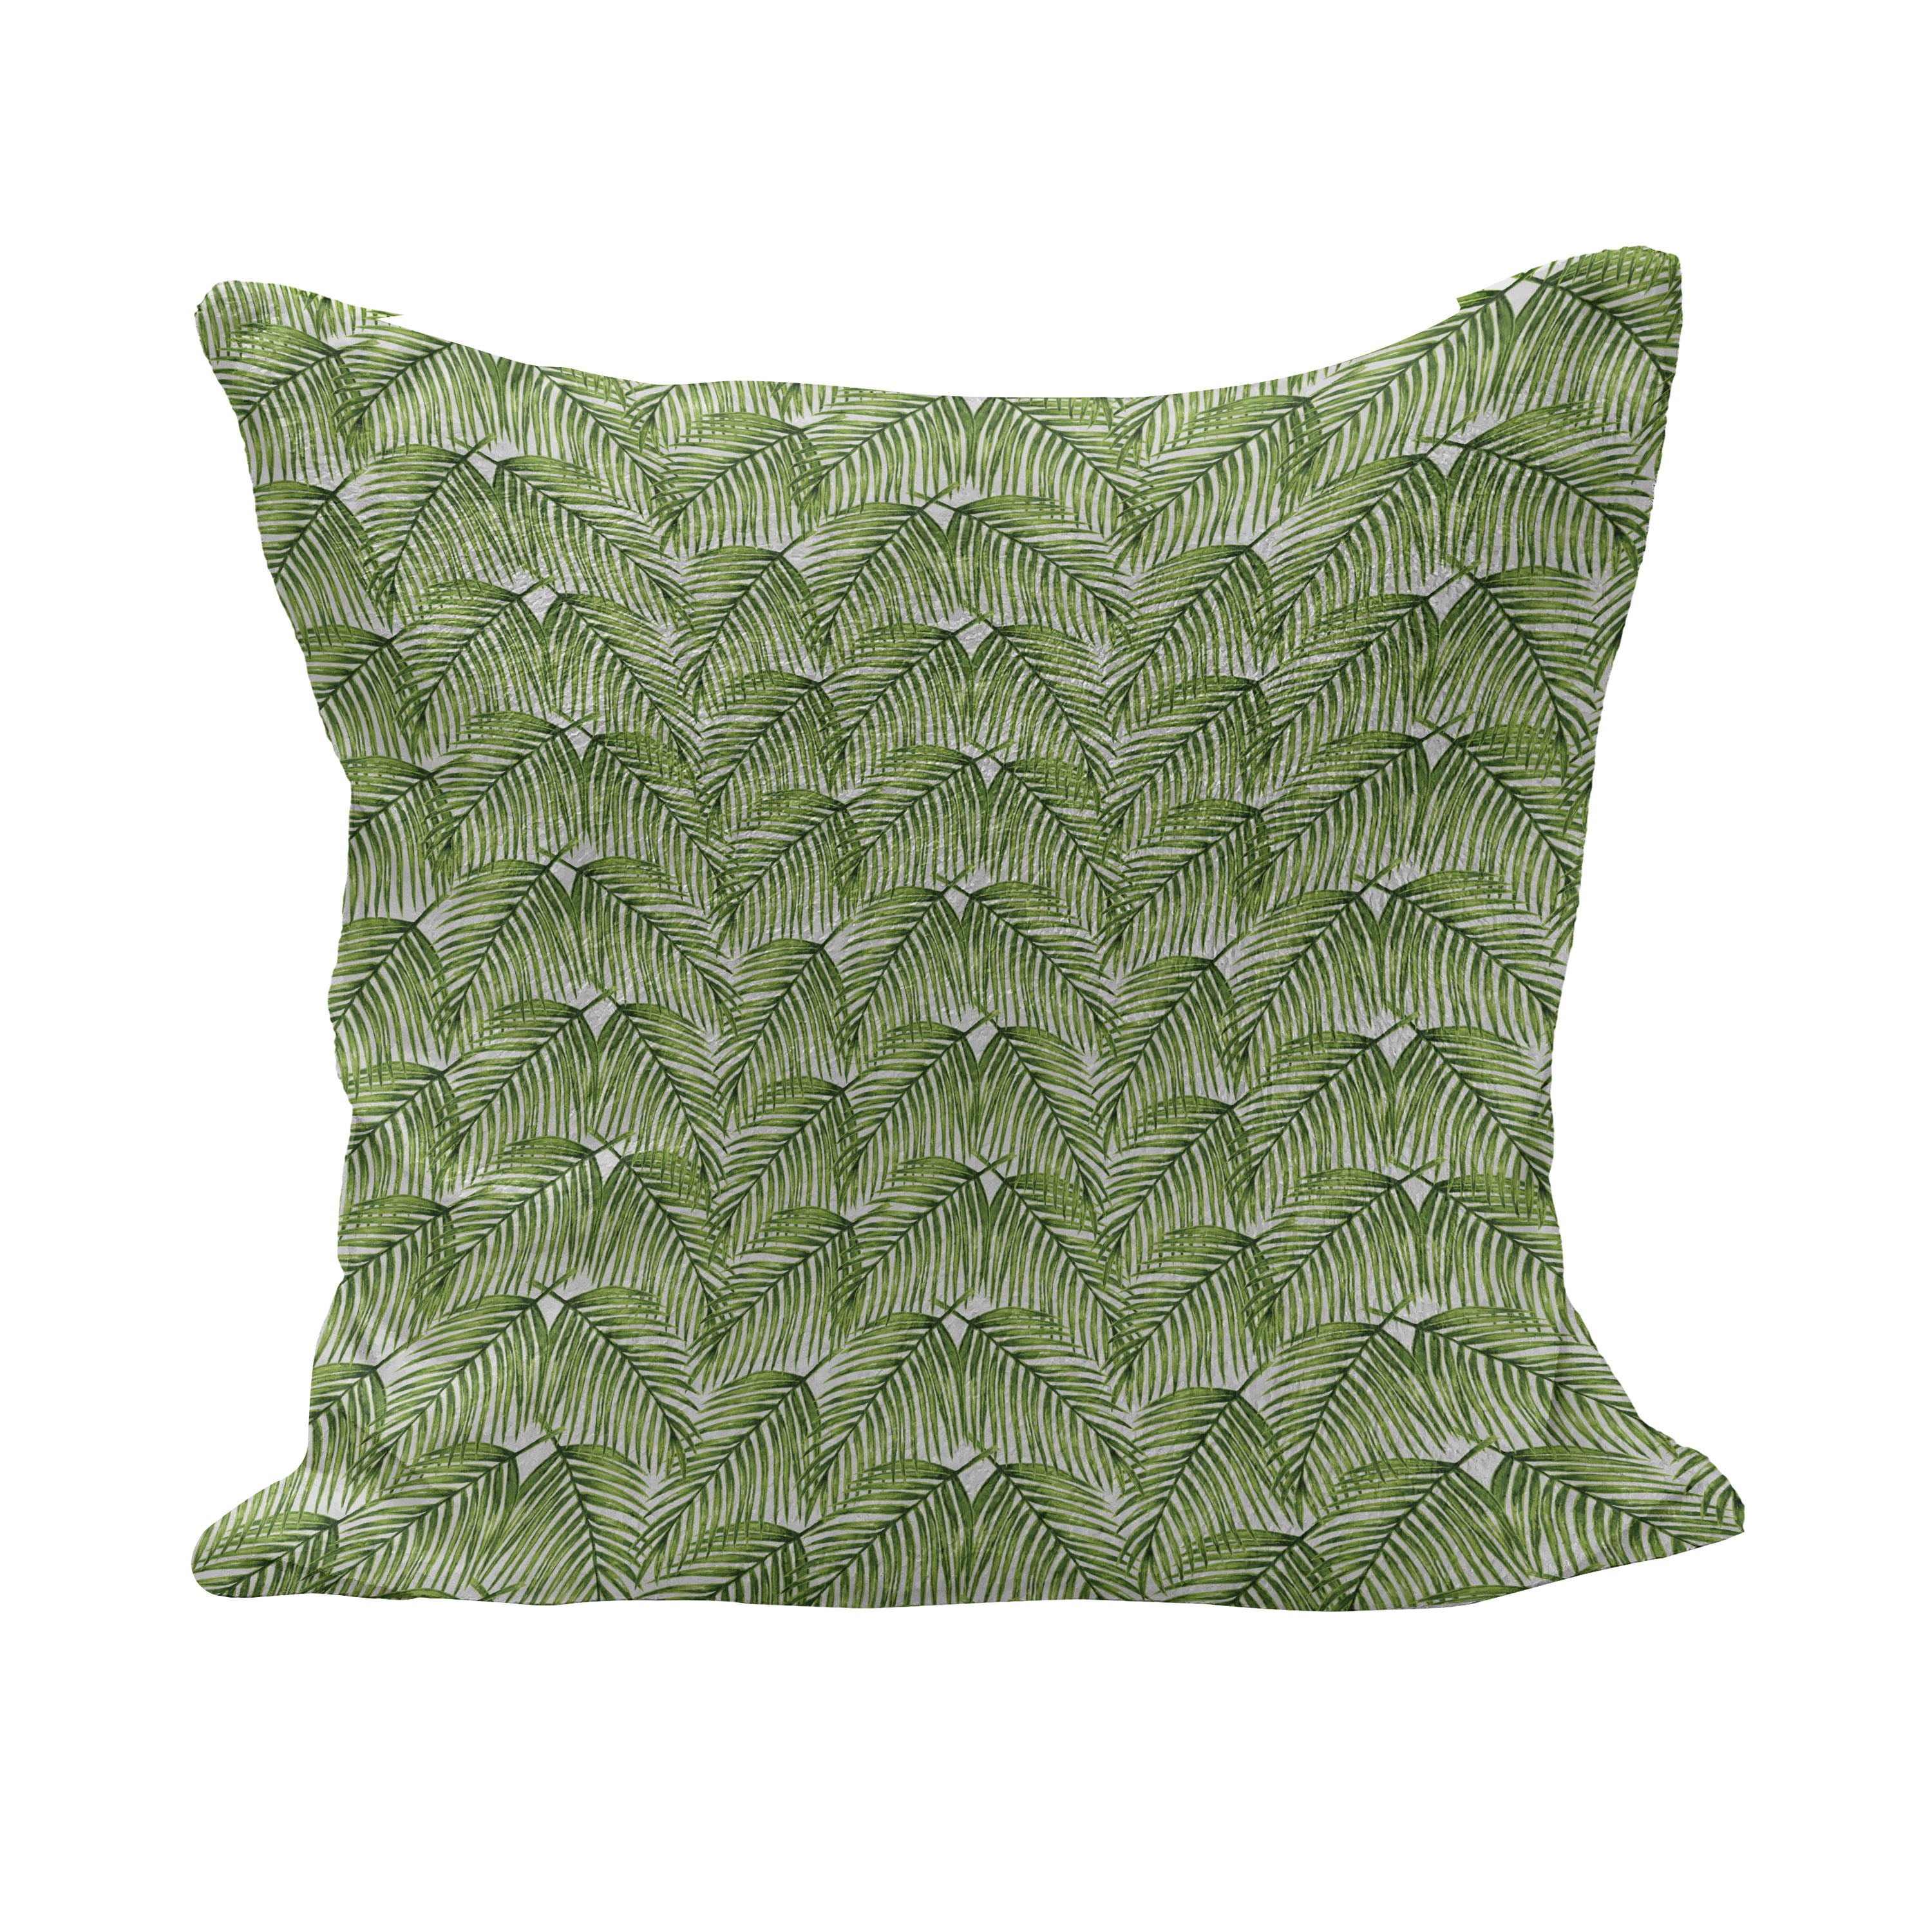 Fern Emerald Forest Olive Green Throw Pillow Cover w Optional Insert by Roostery 